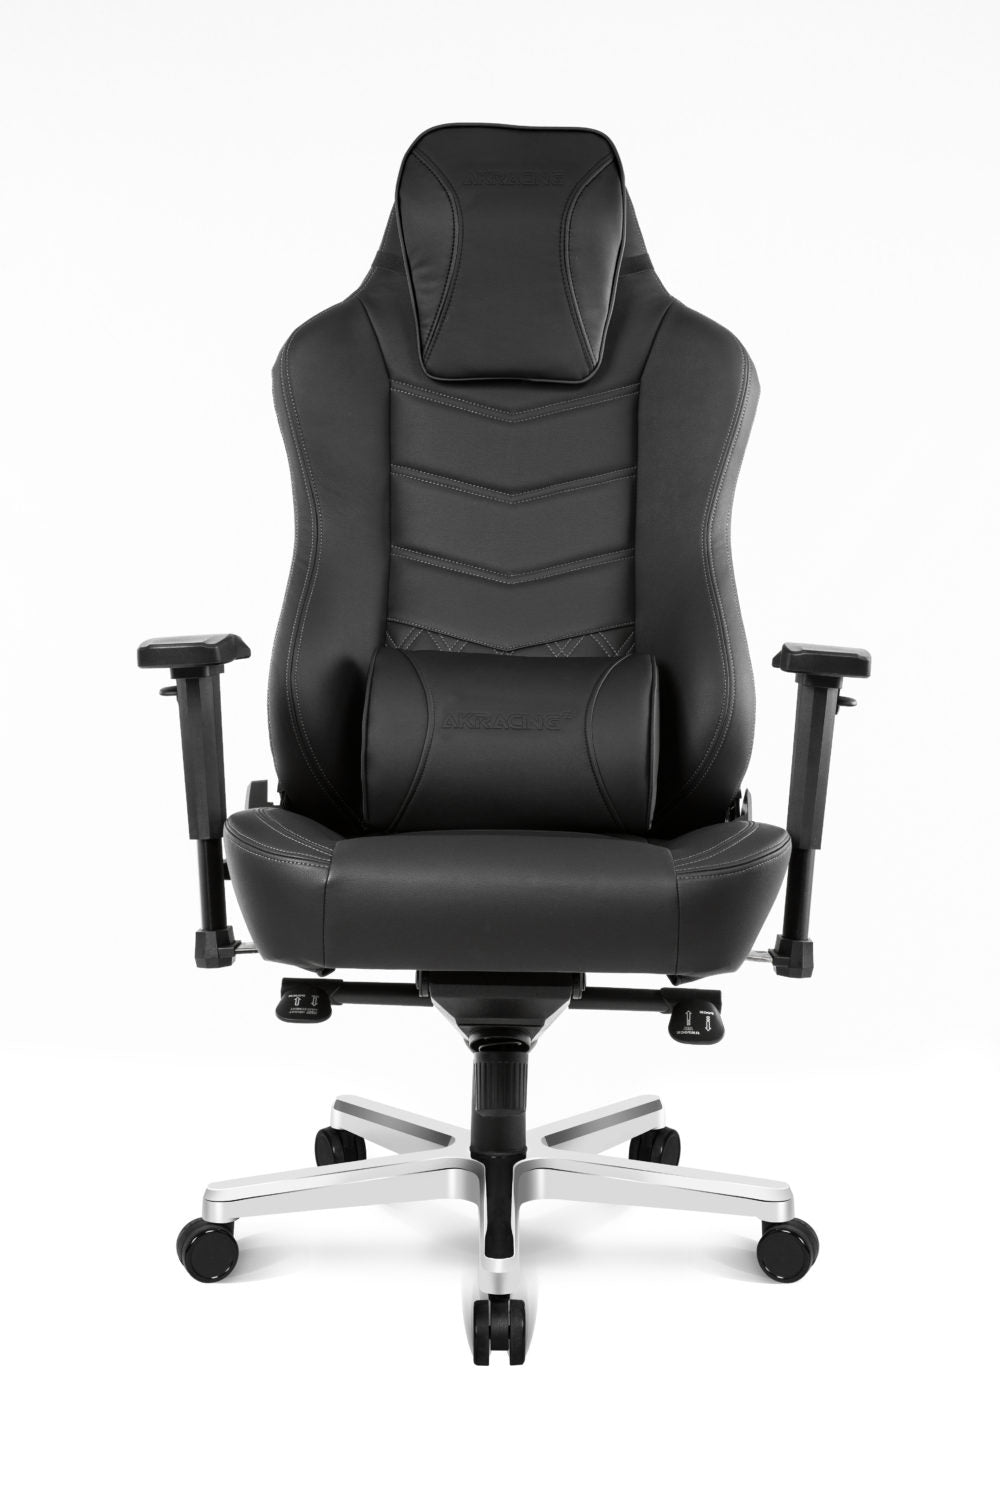 OFFICE SERIES: ONYX Deluxe